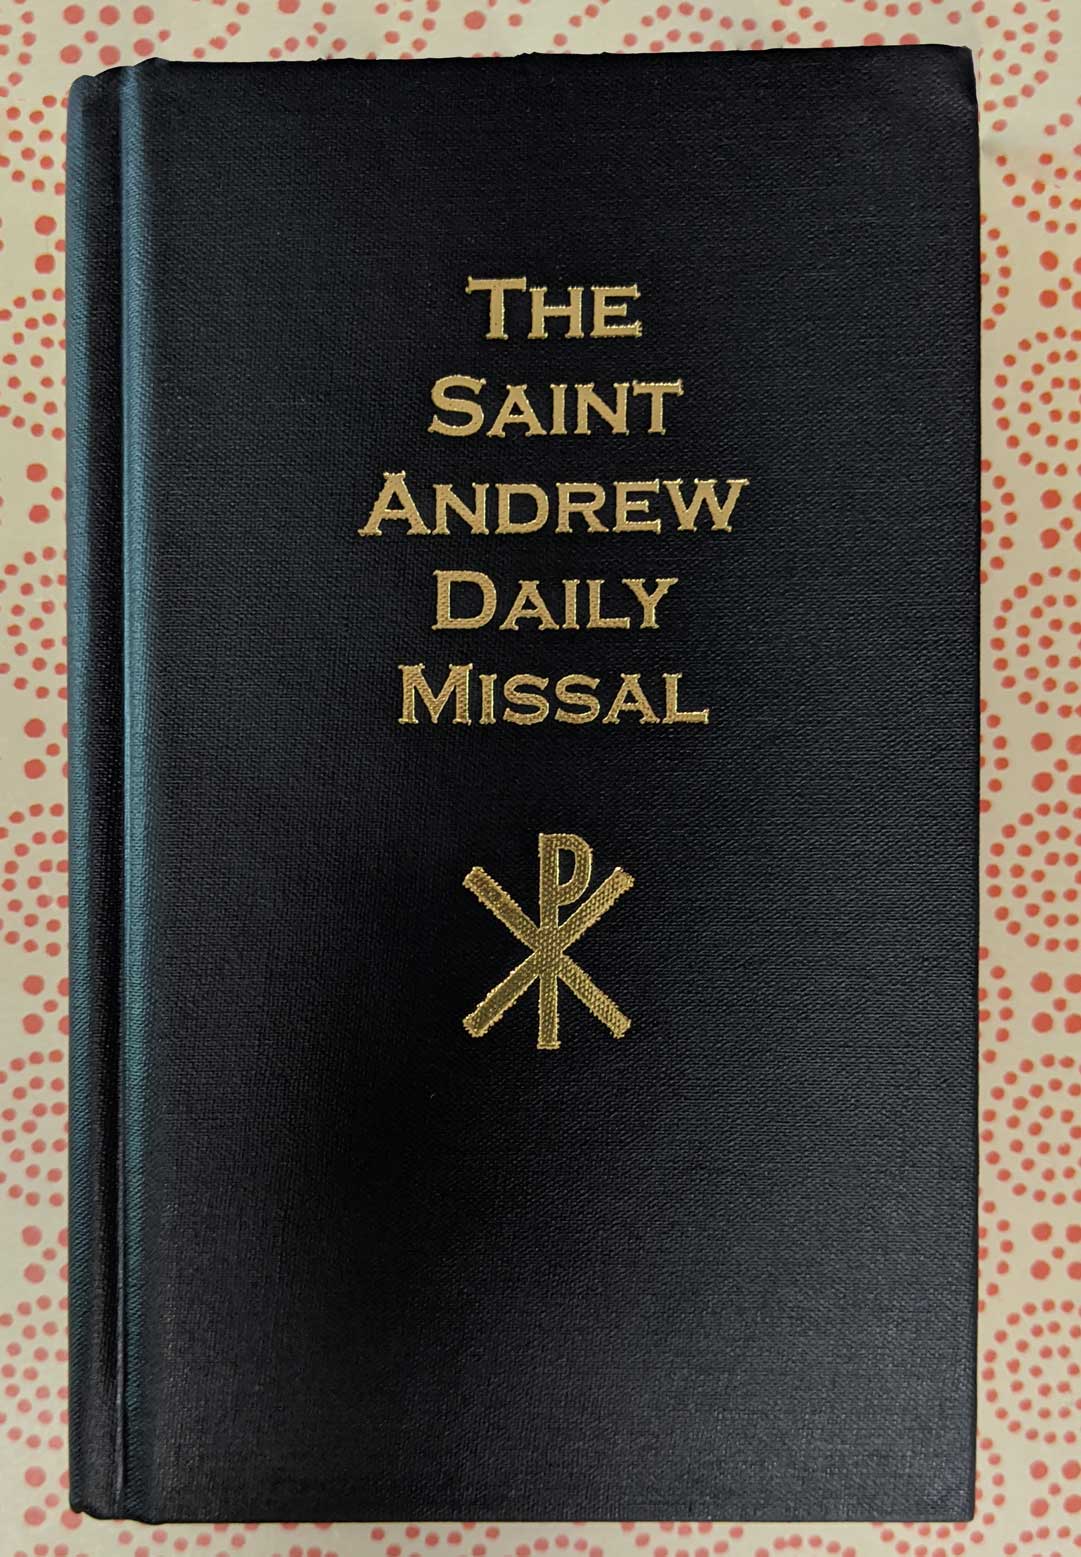 St. Andrew Daily Missal